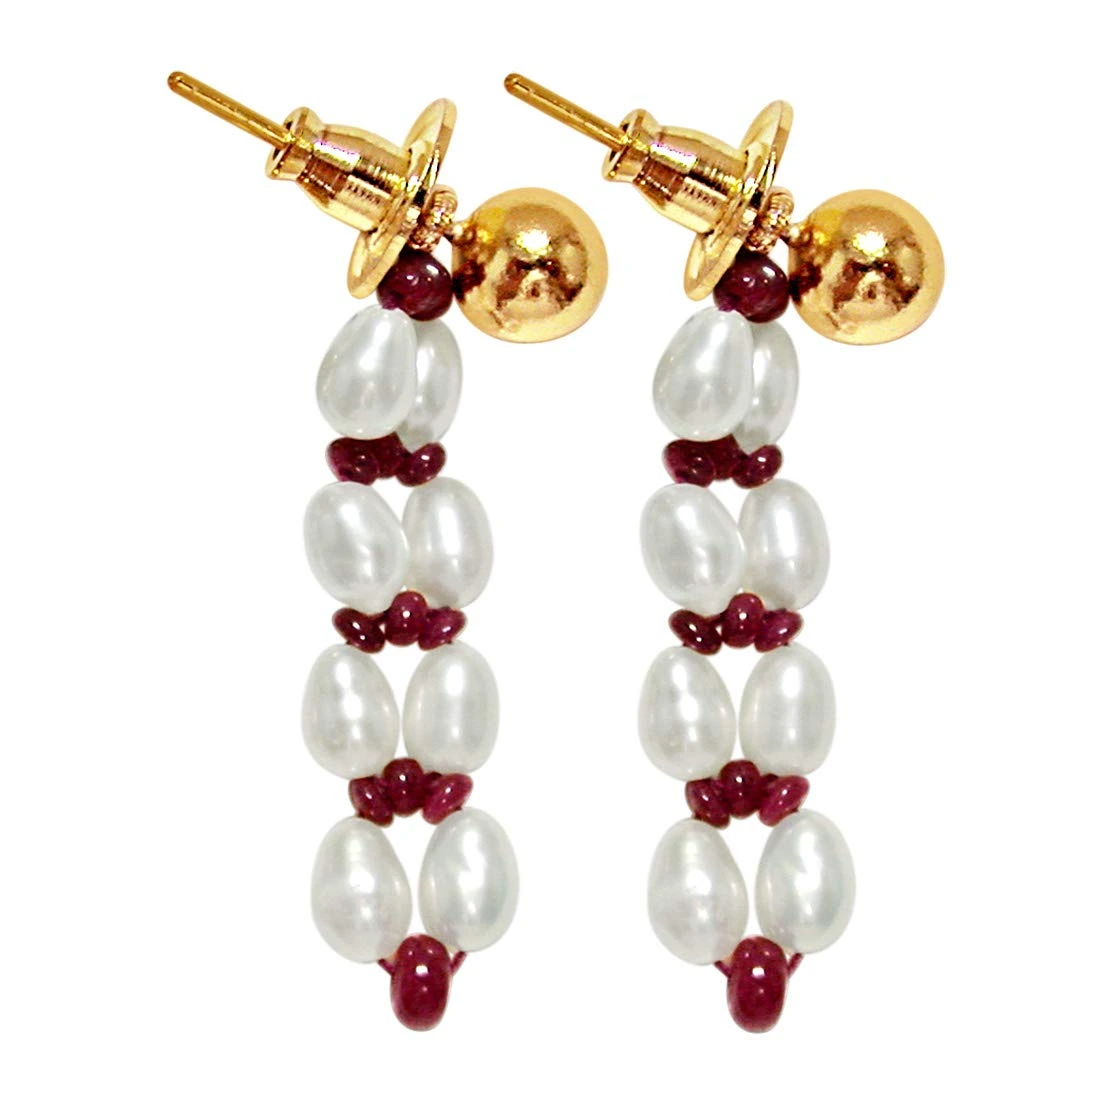 Alluring Aura - Real Ruby Beads & Freshwater Pearls Hanging Earrings for Women (SE78)